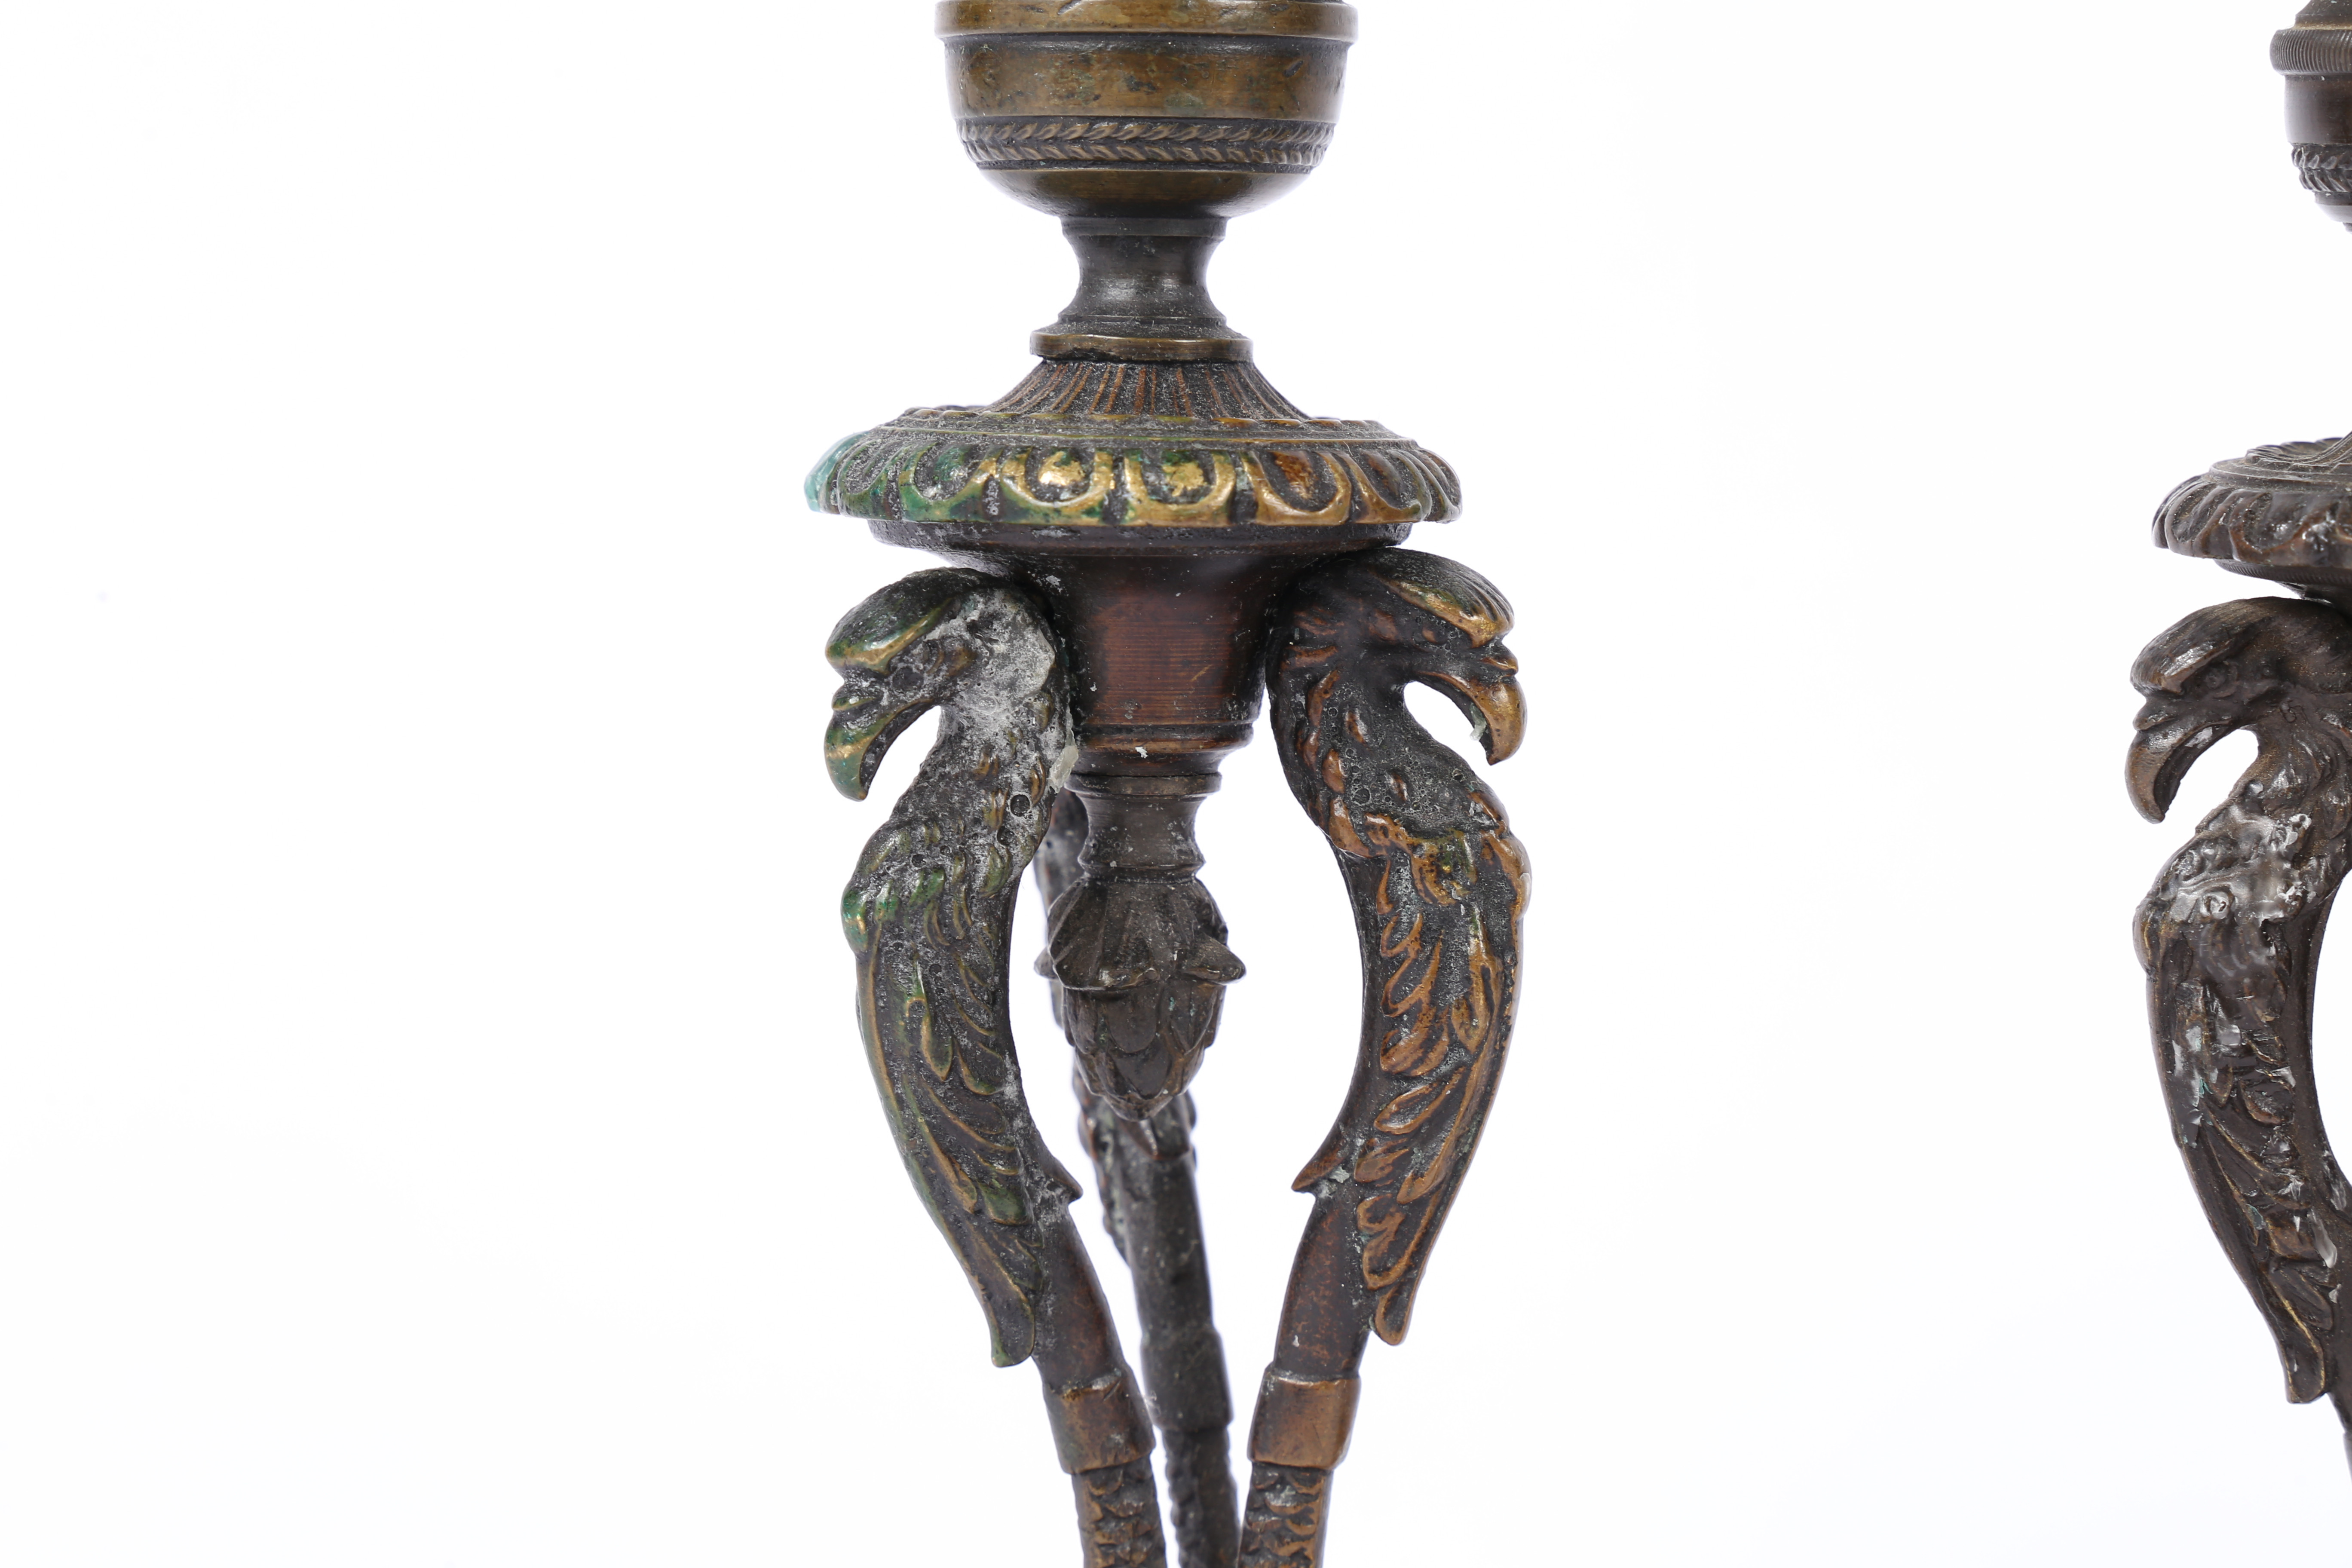 IN THE MANNER OF CHENEY OF LONDON A PAIR OF REGENCY BRONZE CANDLESTICKS. - Image 6 of 6